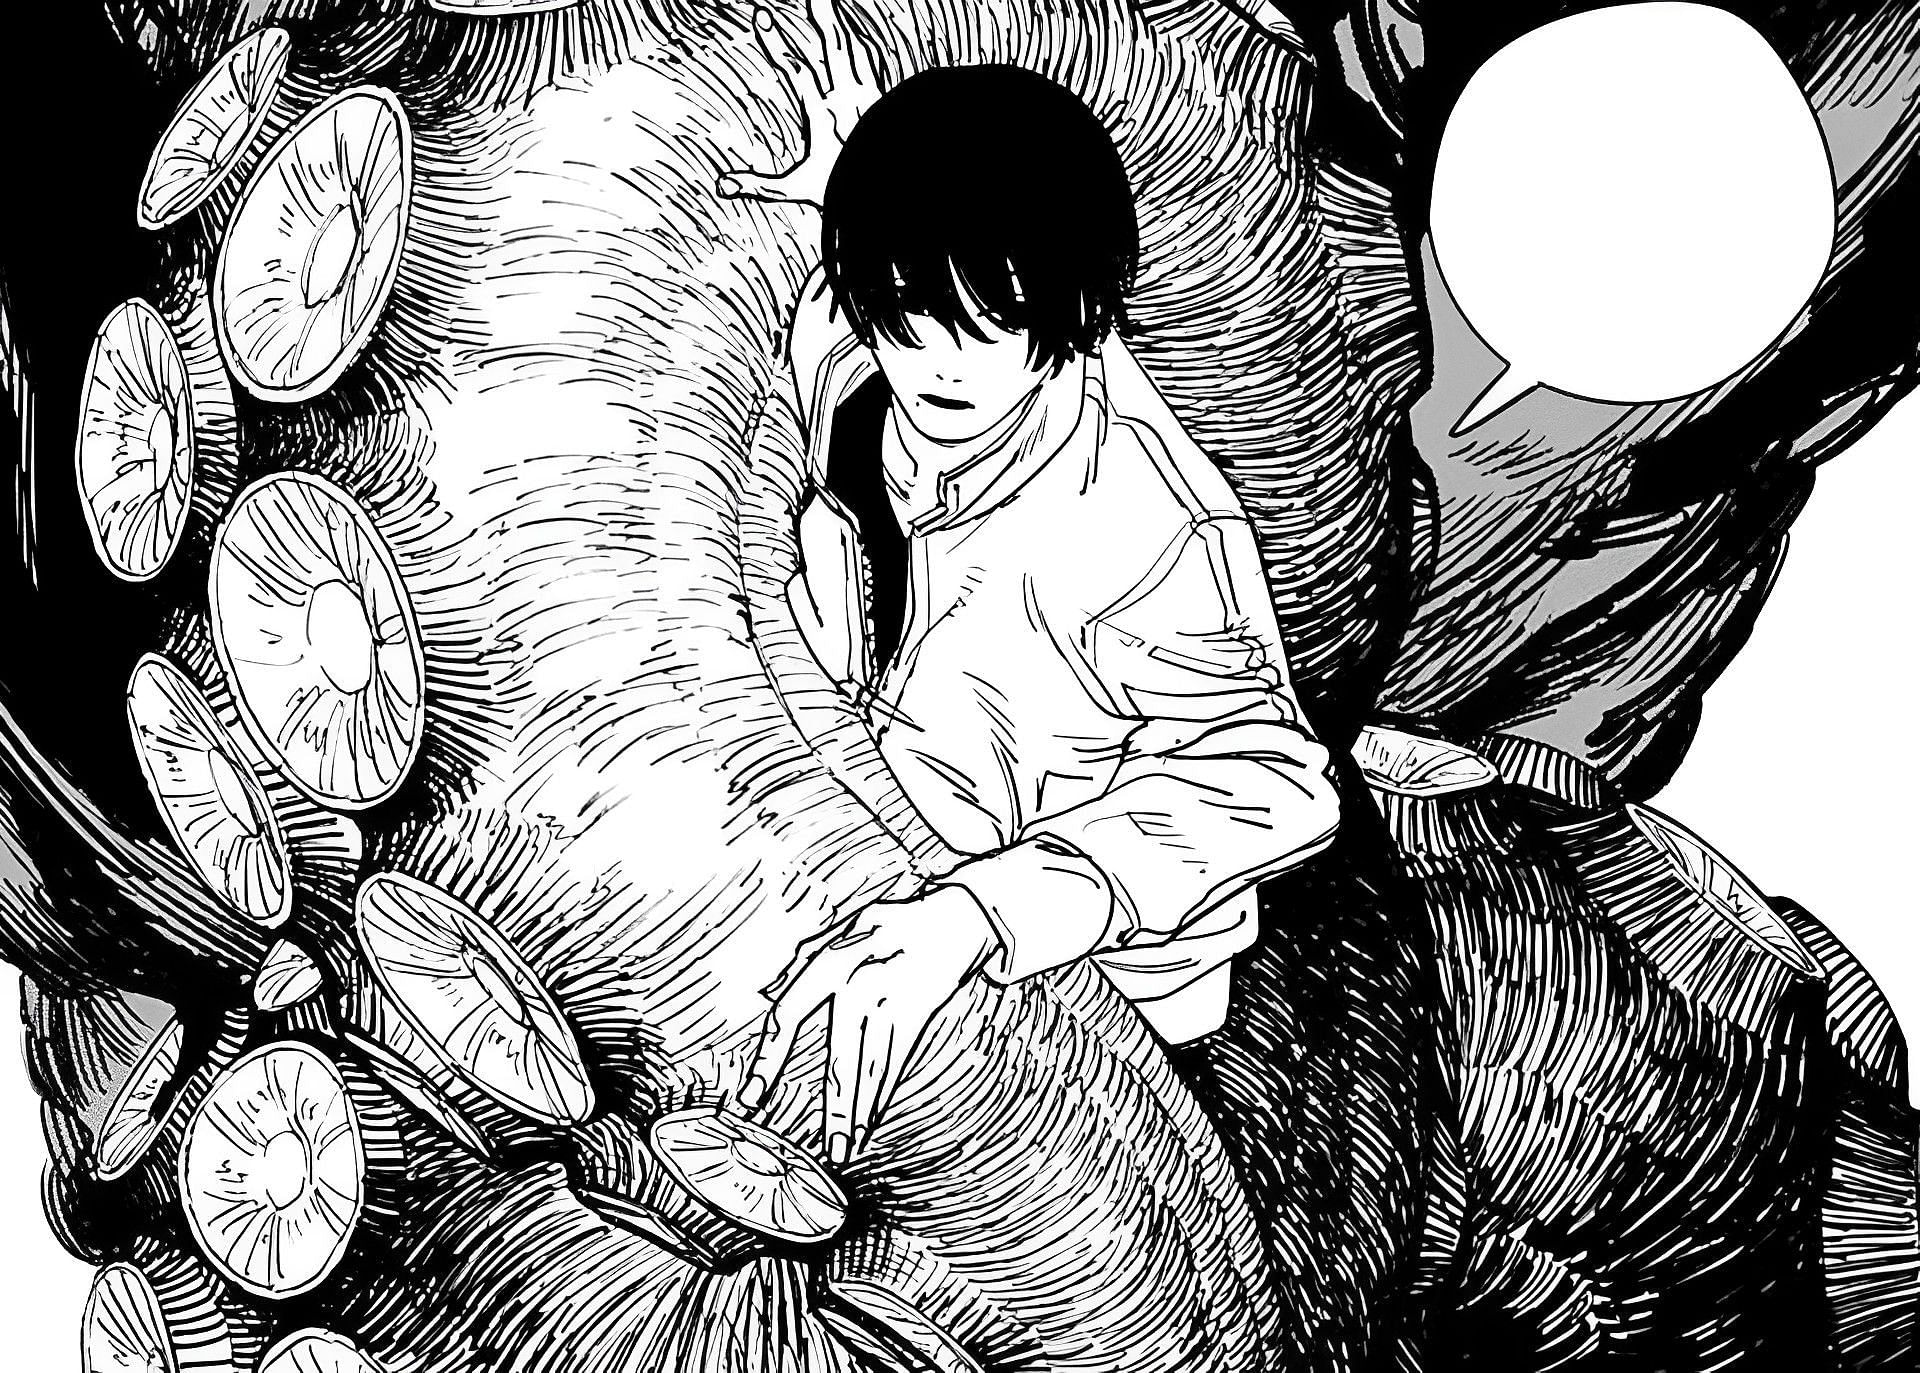 Chainsaw Man Chapter 137 leaves fans shocked & confused: Unraveling the  madness - Hindustan Times